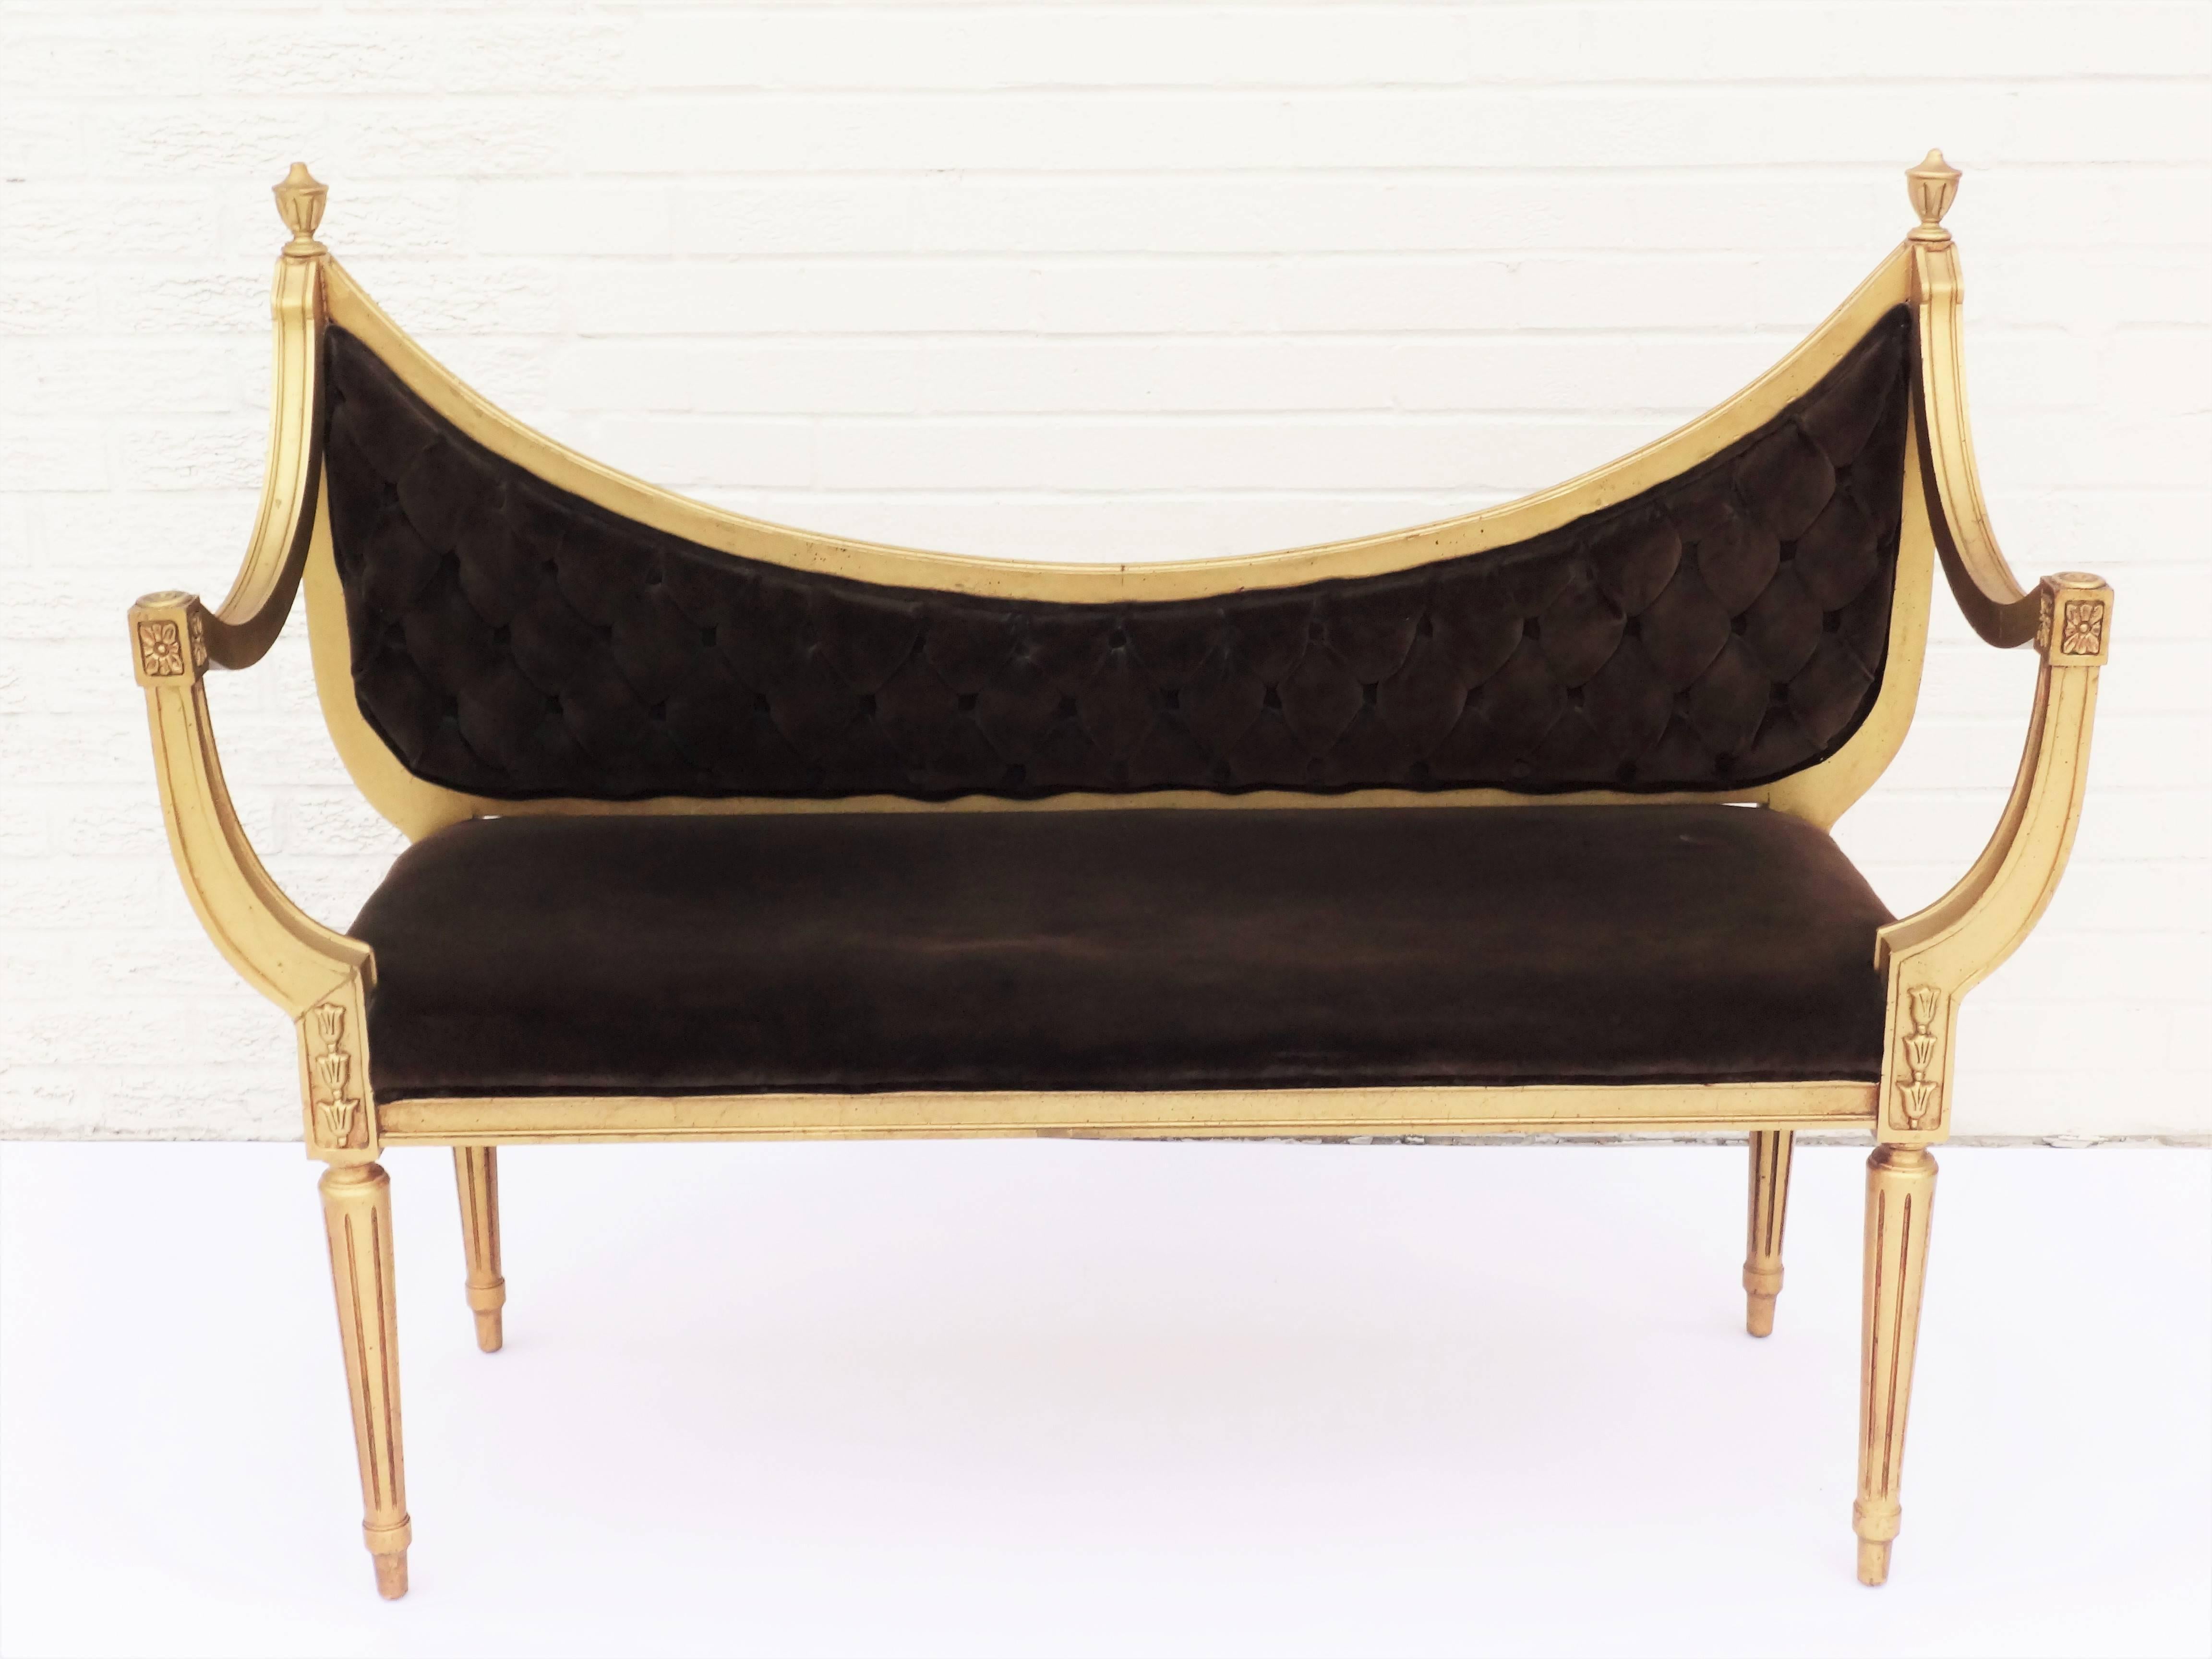 Hollywood Regency tufted scoop back settee bench with reeded legs and wonderfully shaped arms, gilt ball finials and detailing. All original gold finish and fabric. Ready to be reinvented with your choice of fabric and finish. We offer the finest